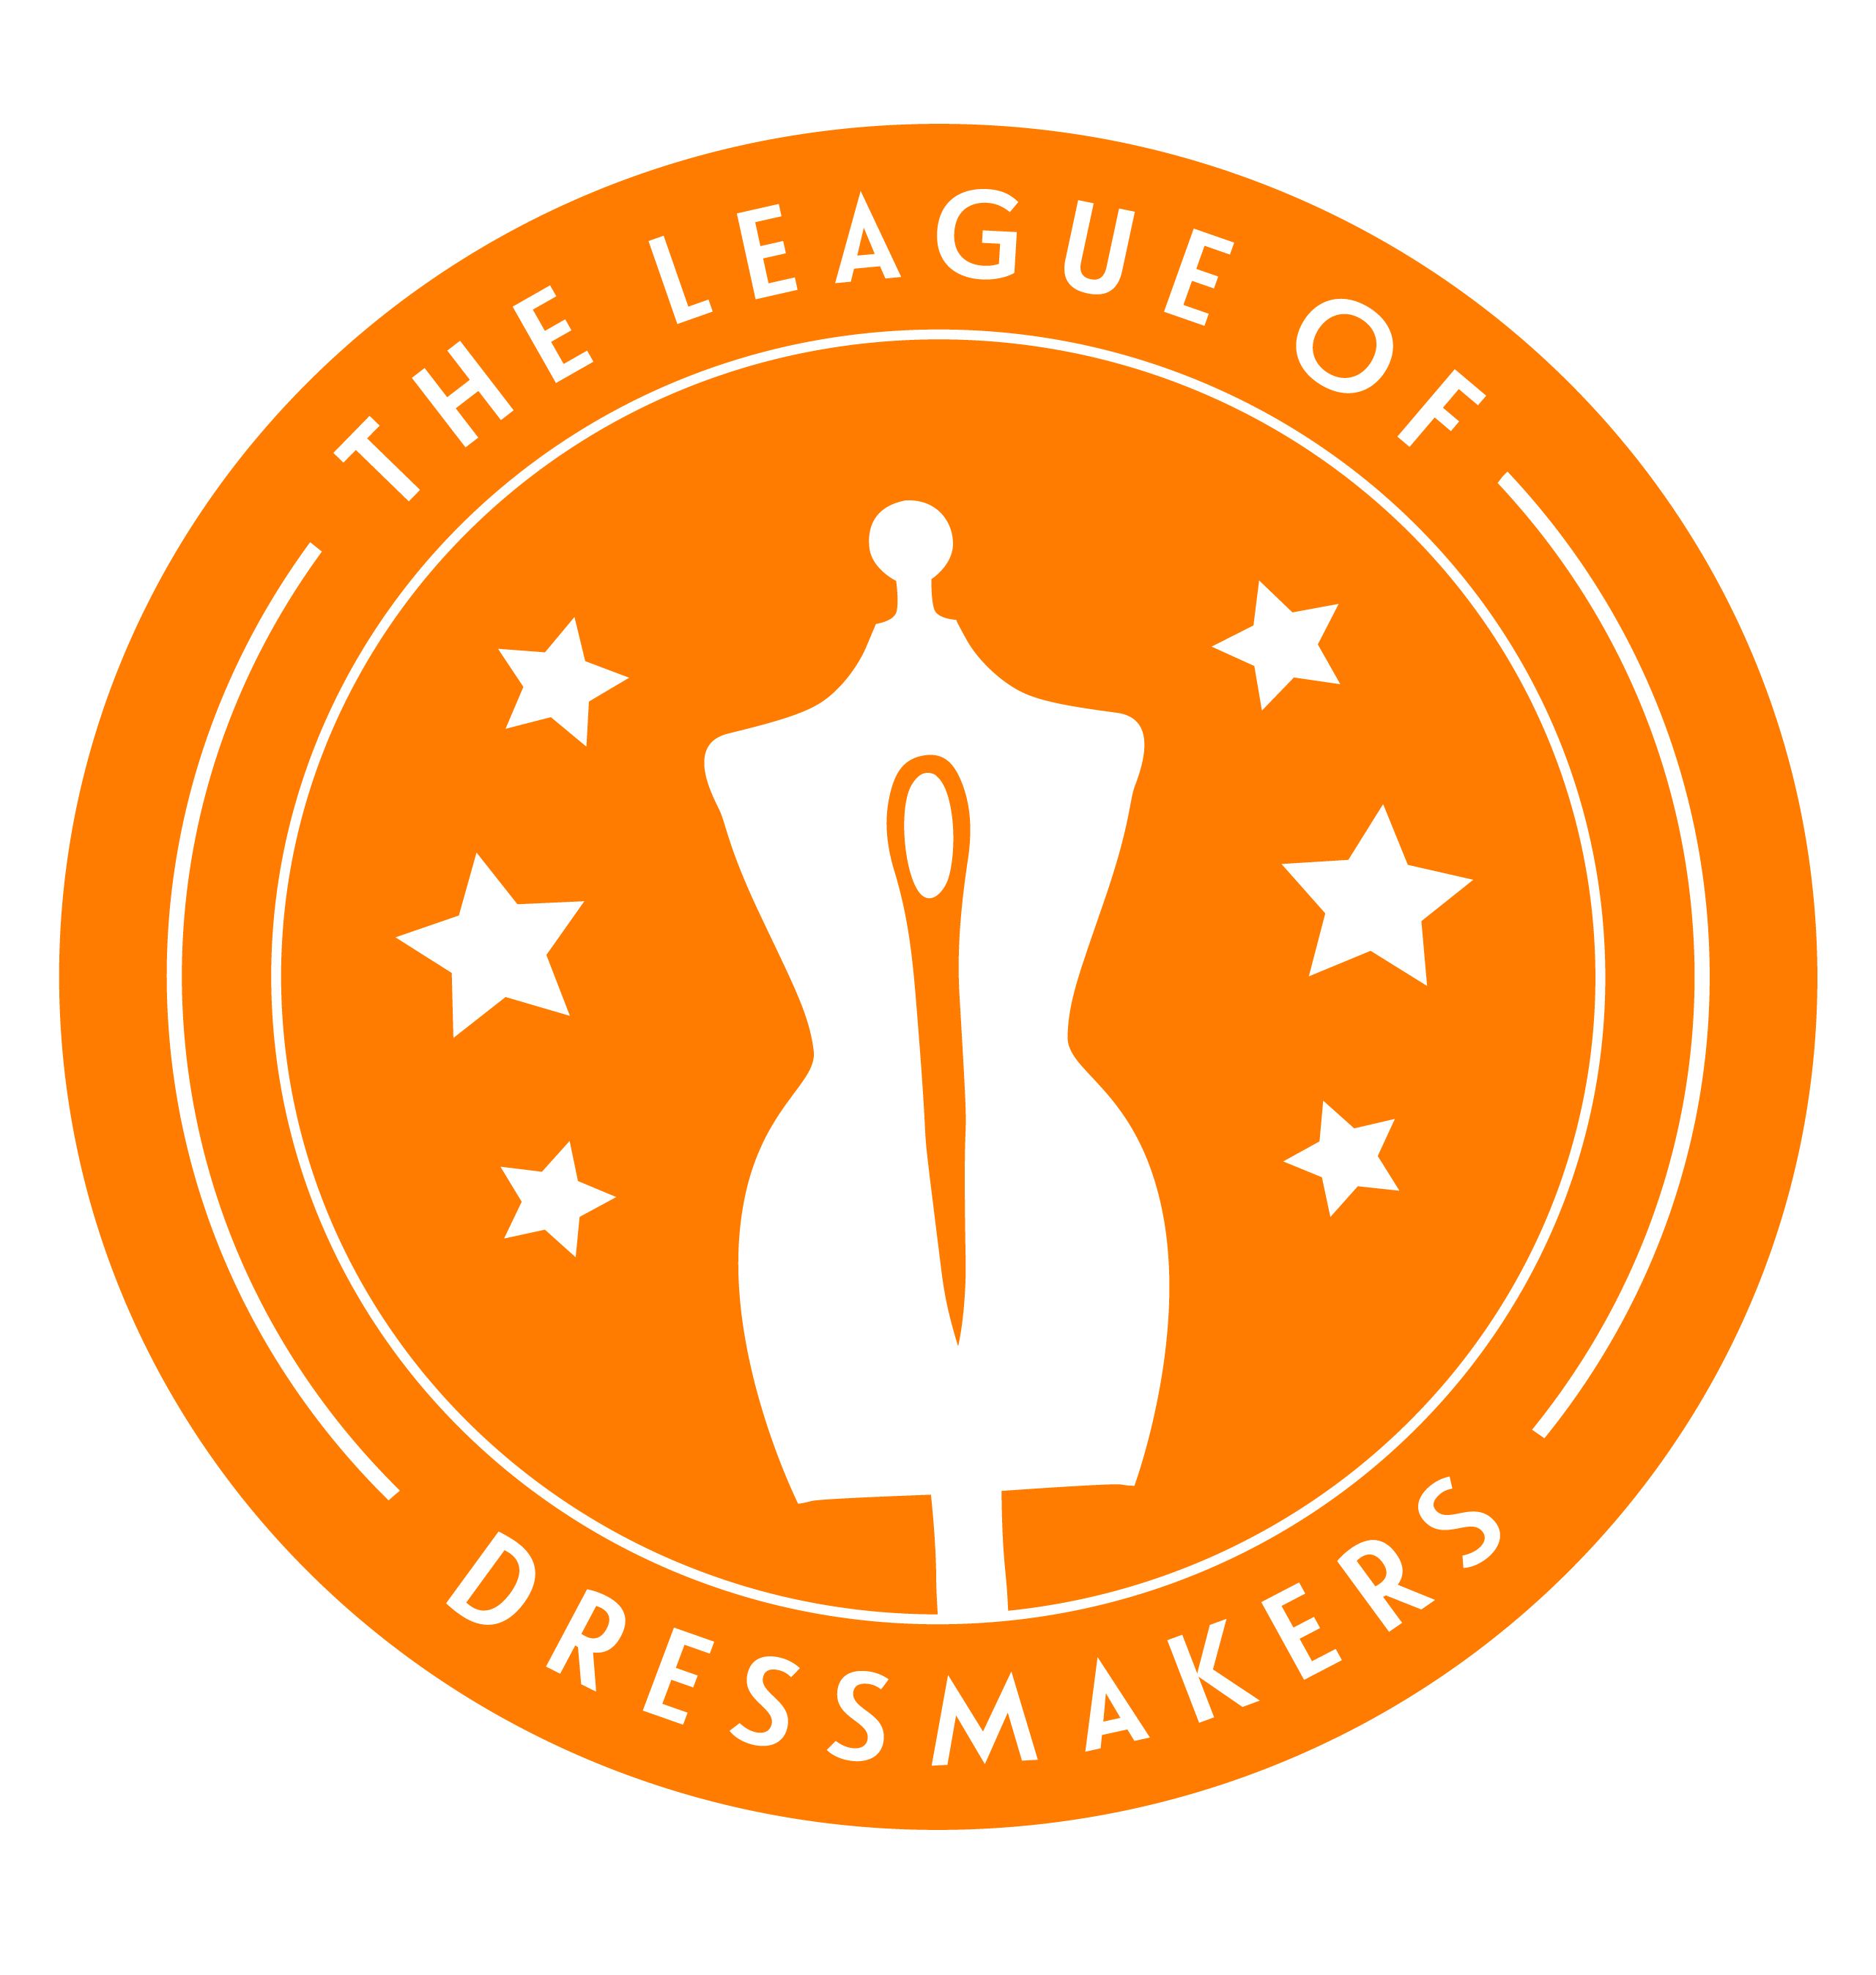 League of Dressmakers Announces Private Community Platform and Ten New Garment Sewing Patterns